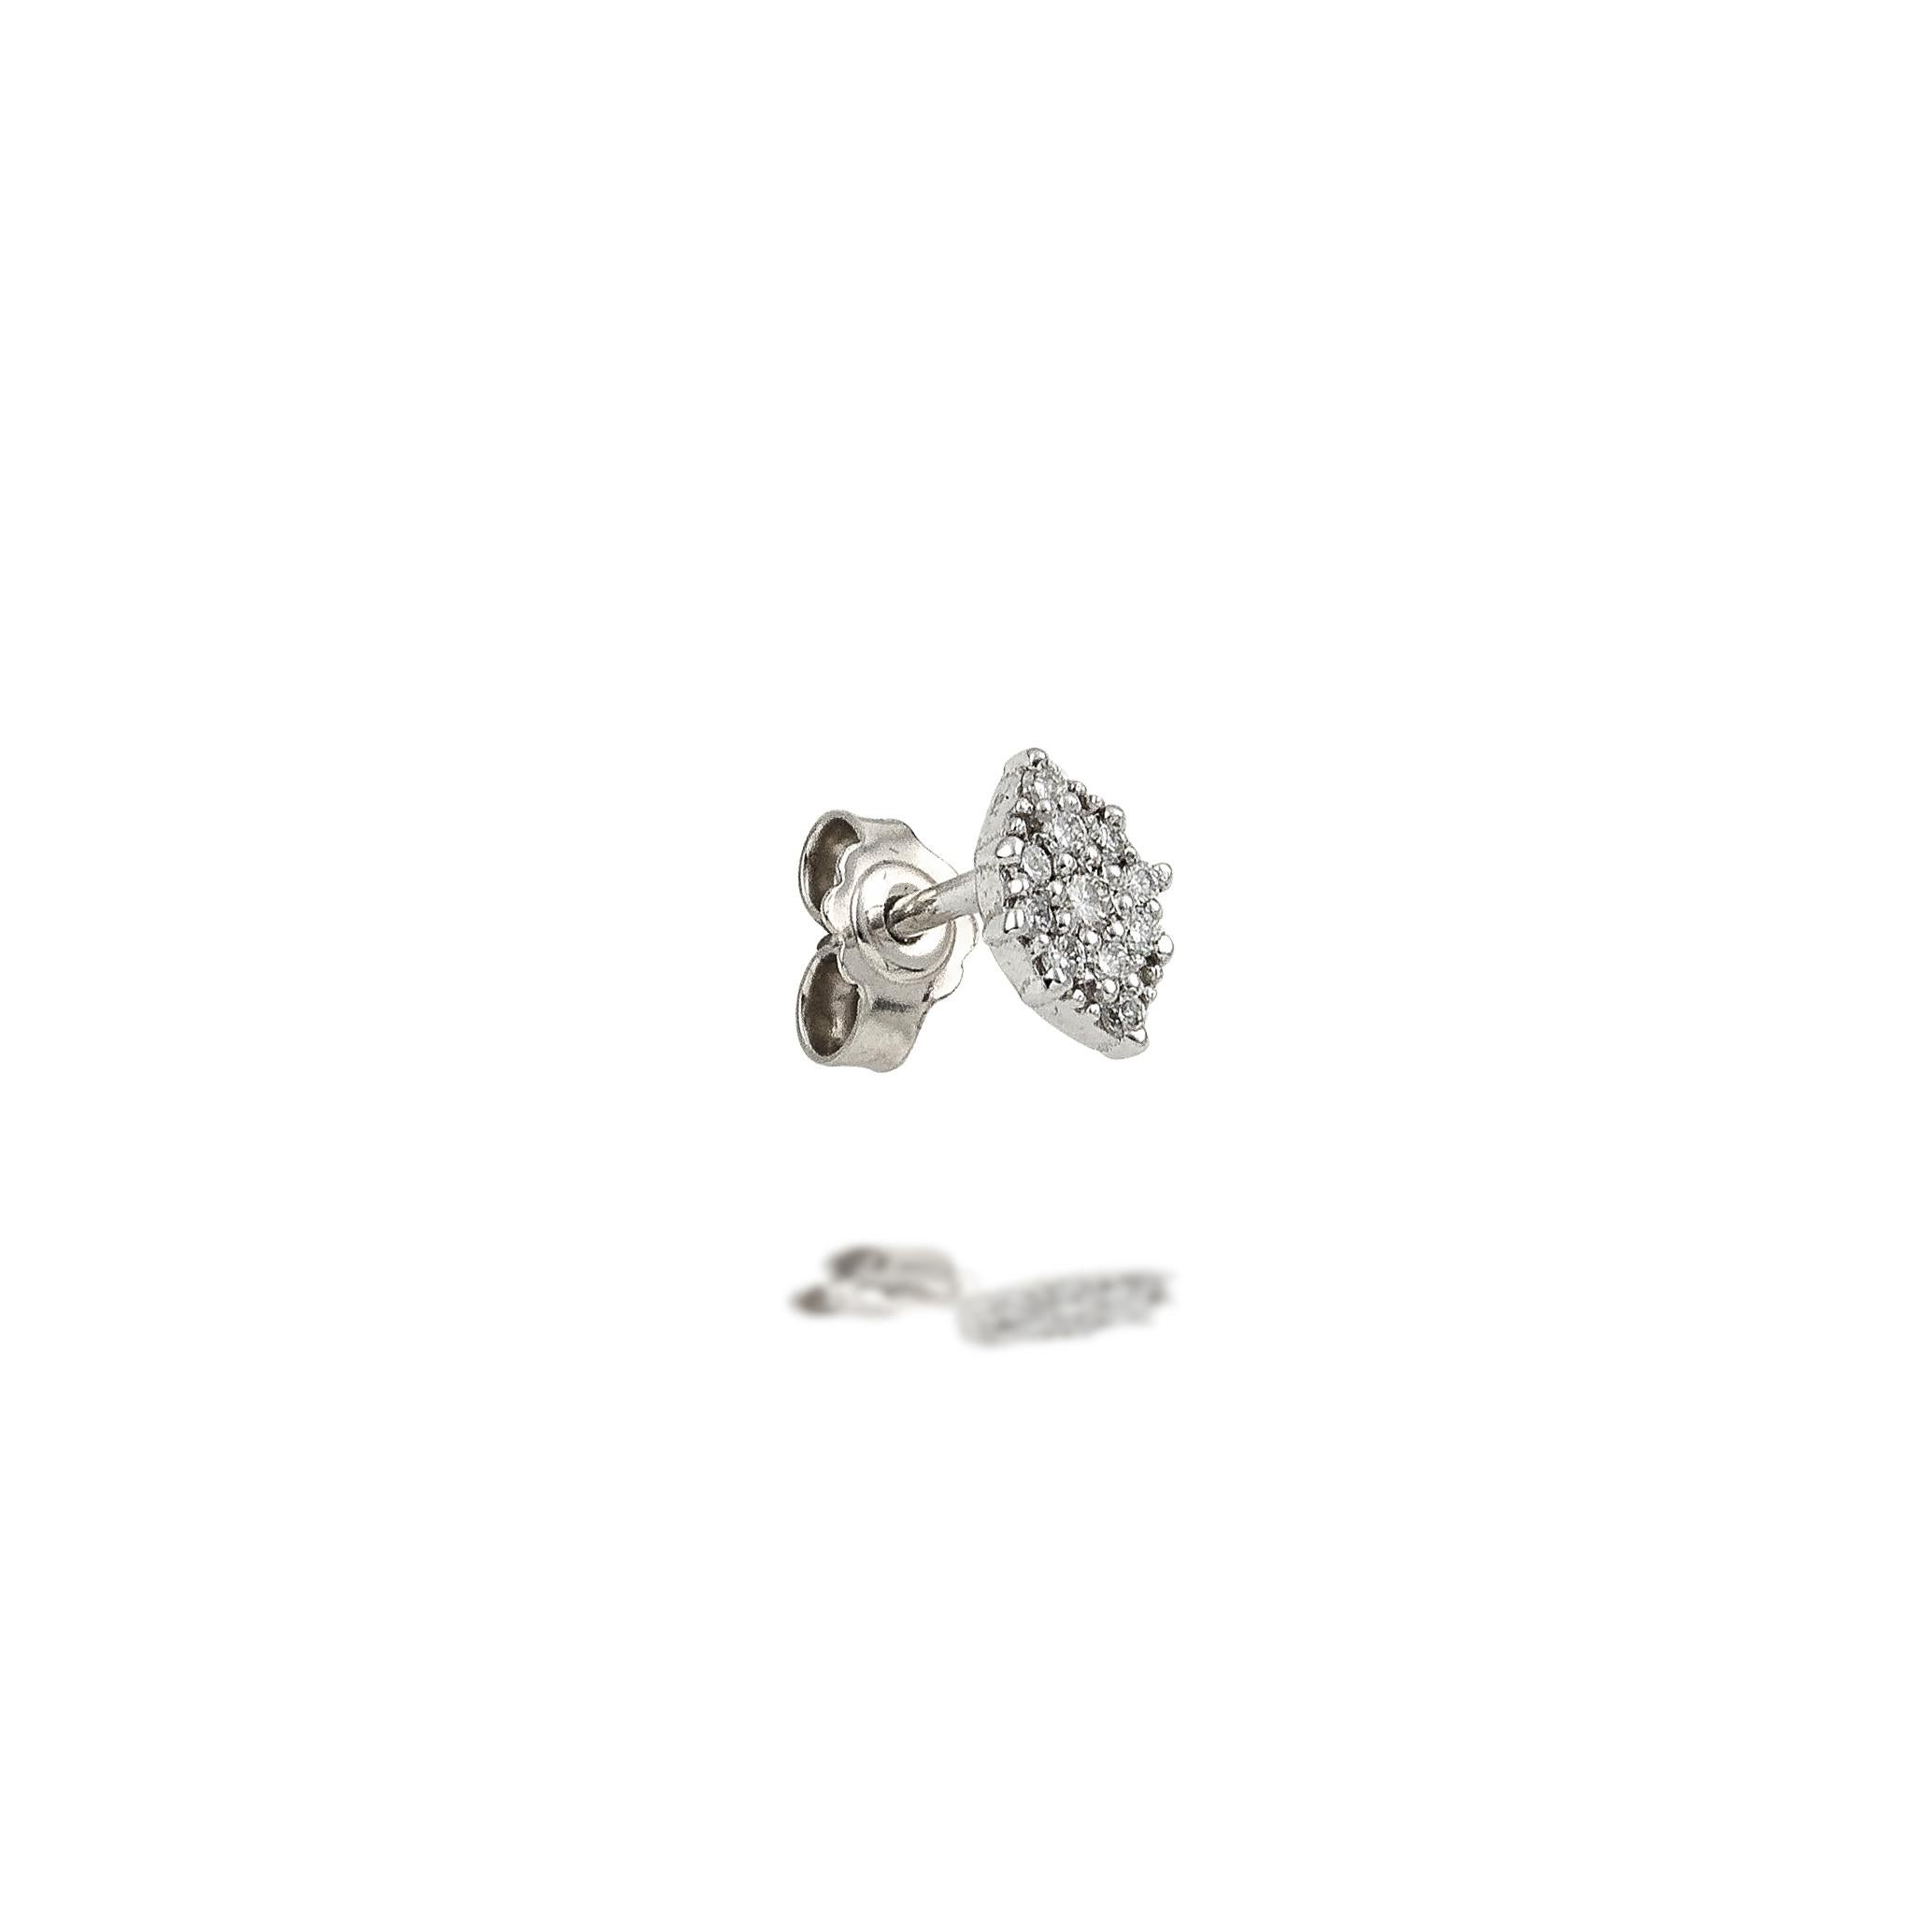 Recycled 14K White Gold

Diamonds Approx. 0.1 ct

Large Single Marquise Earring Stud in White Gold and Diamonds

This collection combines the simplicity of the single piece with the opulence of diamonds.

All jewels in the Essentials – Mix & Match